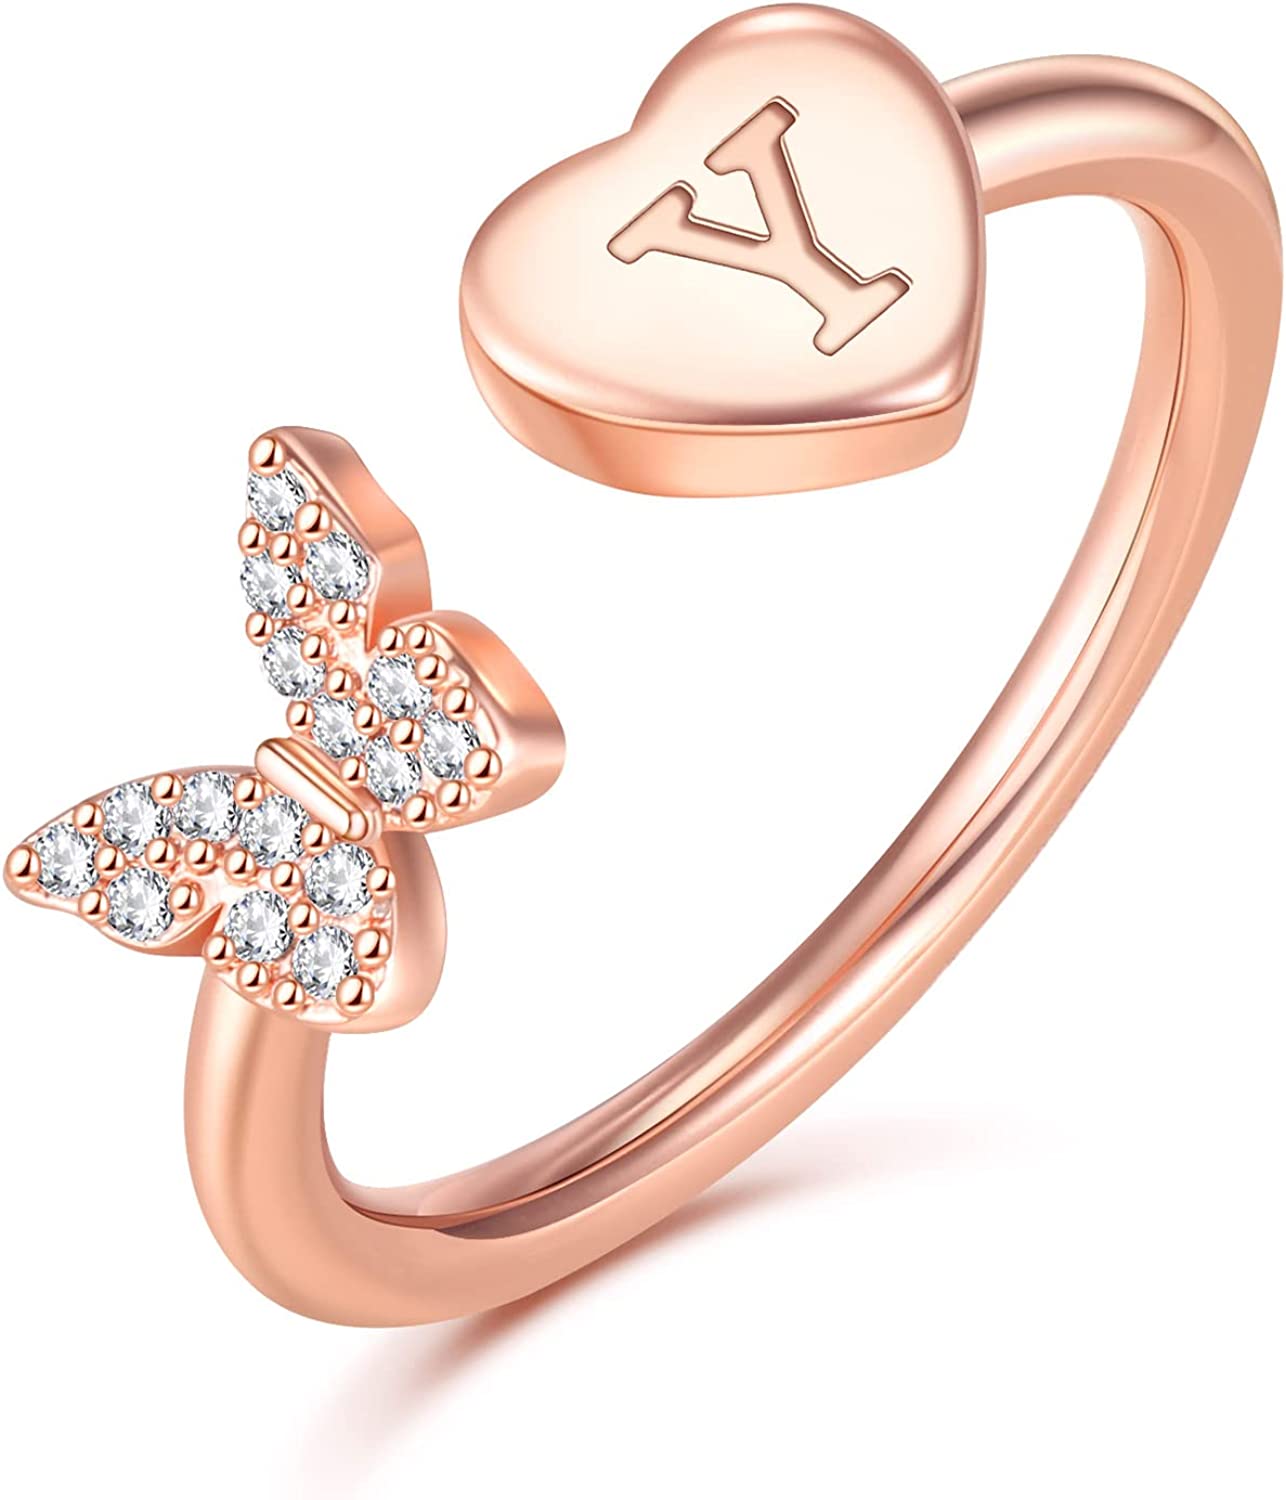 Stackable Initial Rings for Women Girls, Rose Gold Plated Butterfly Capital Letter Initial Rings for Women Teens Girls Letter Rings Stackable Rings for Girls Teen Girls